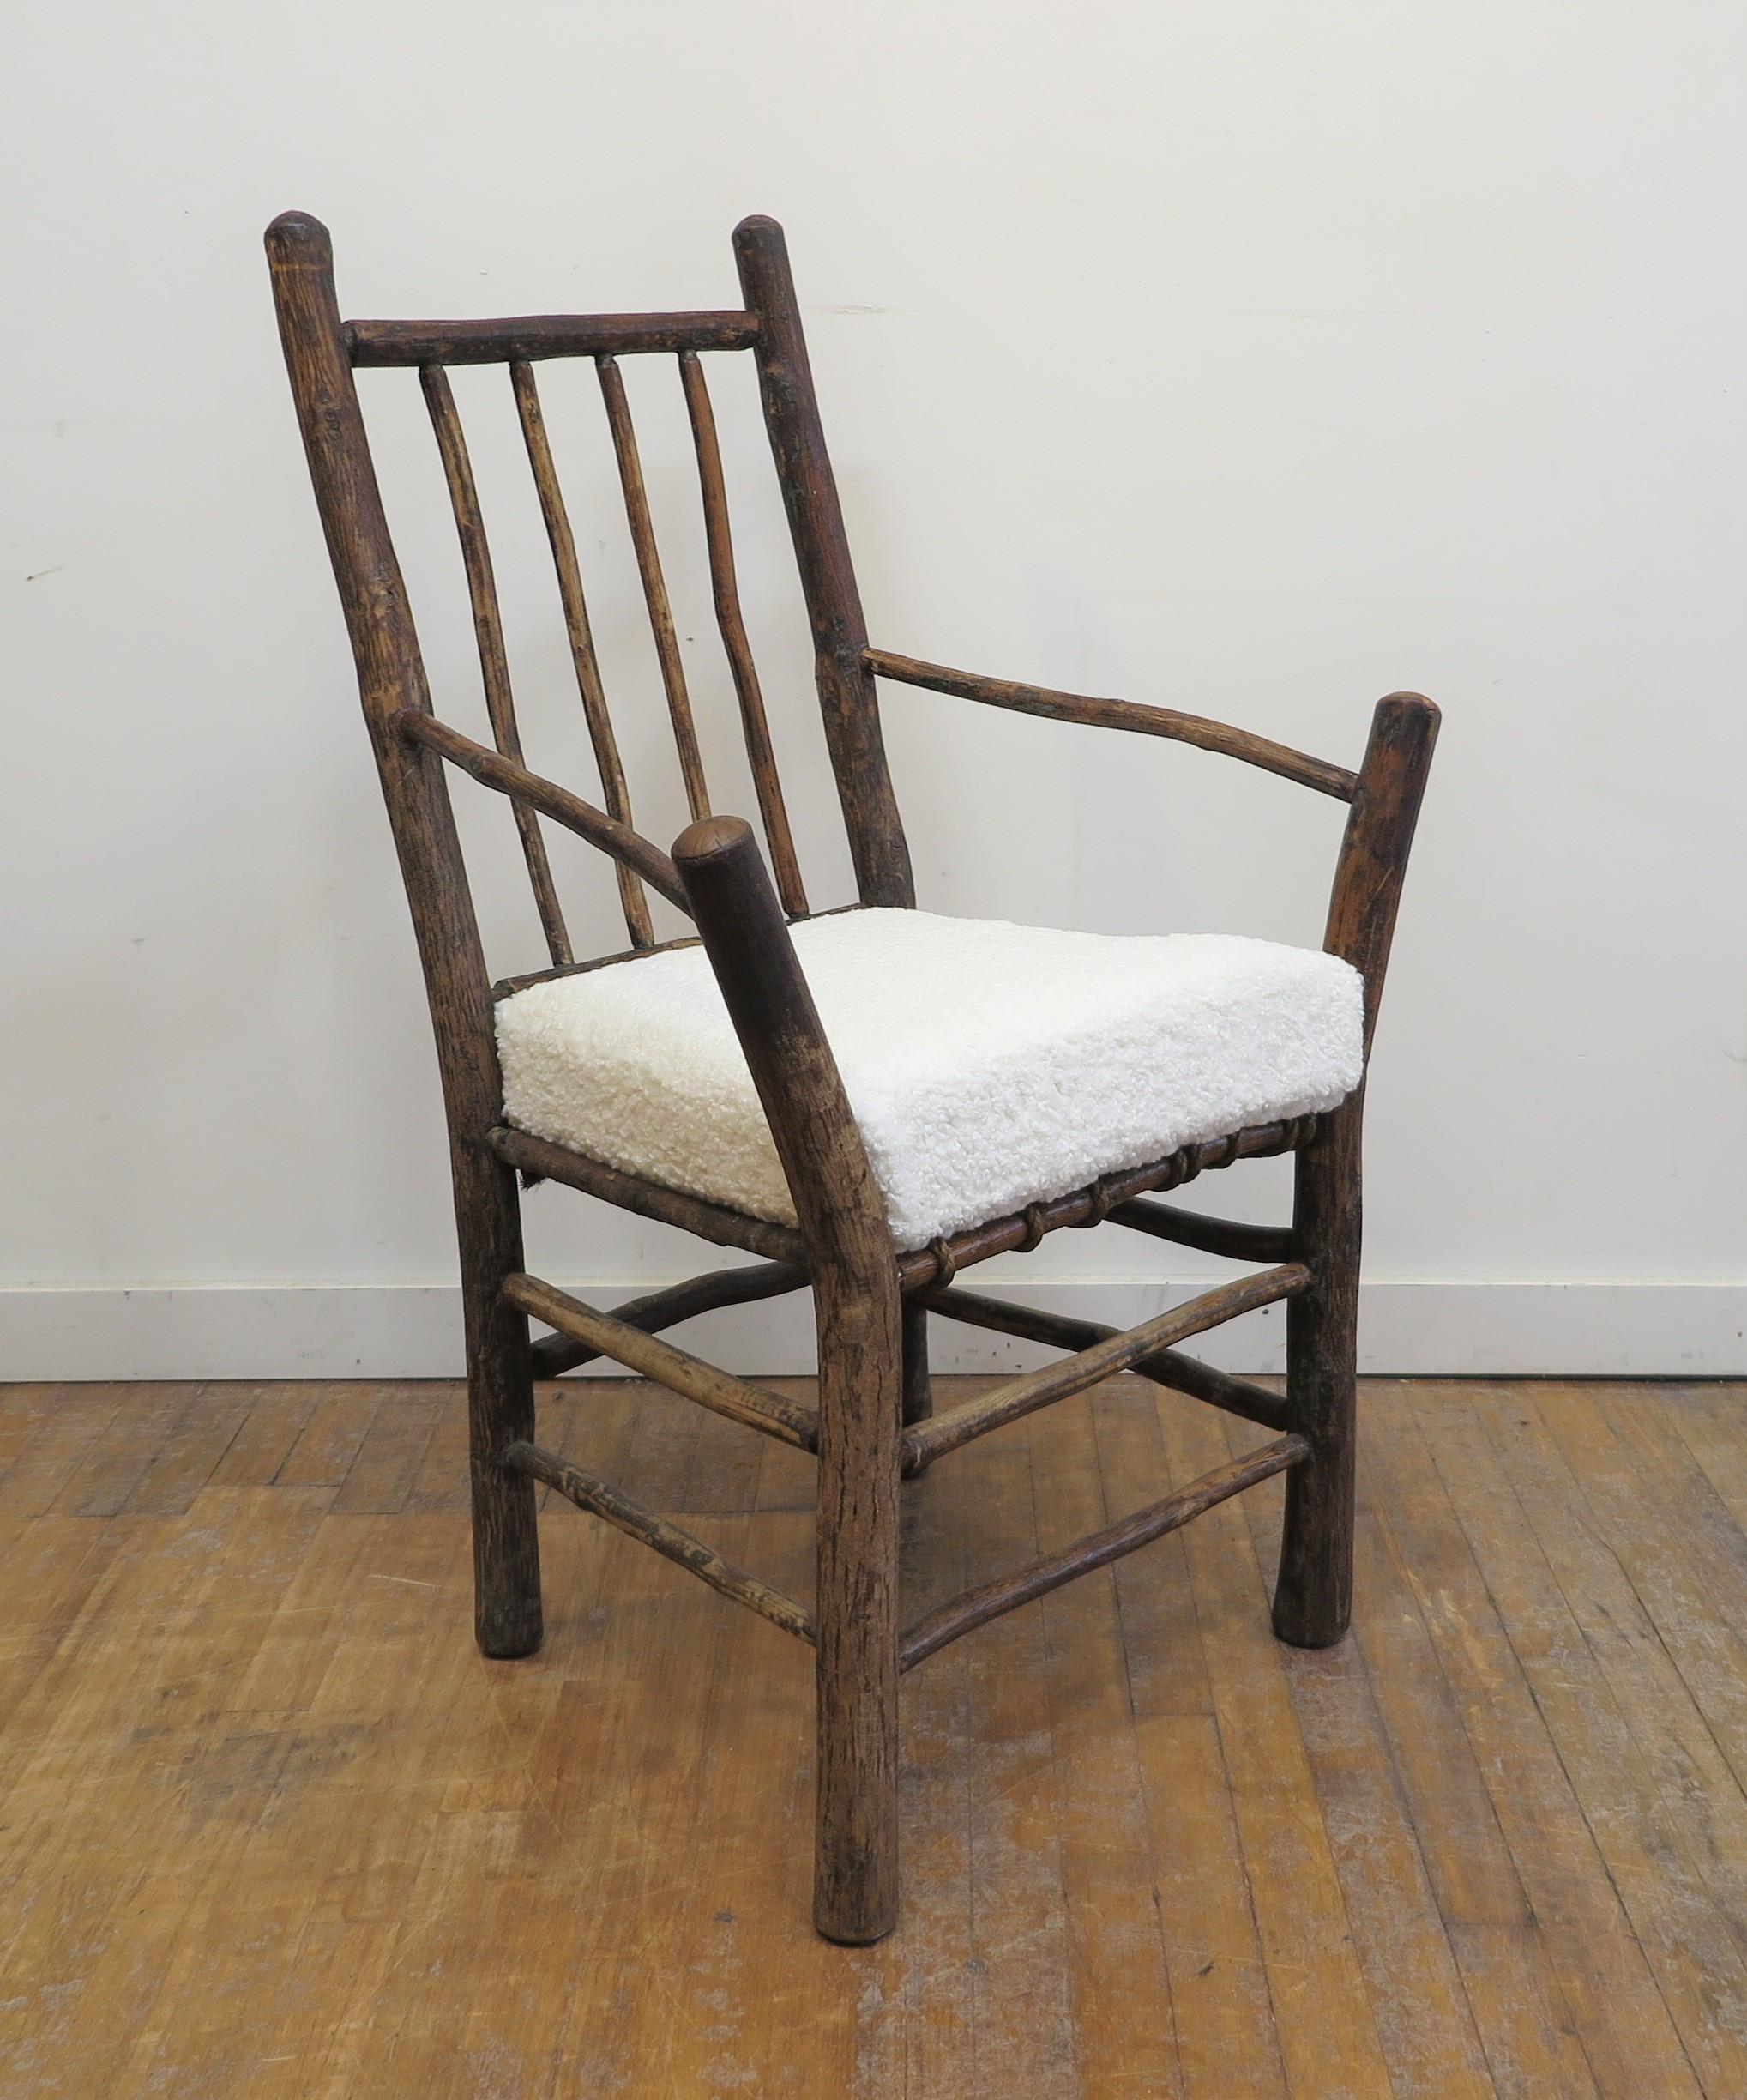 Antique Twig Adirondacks Chair. Very well made example of a rustic Twig Adirondack style chair. Comfortable to sit in ergonomically, the design simple but well made. The arms splay out to the left right sides and are in good position to rest arms or